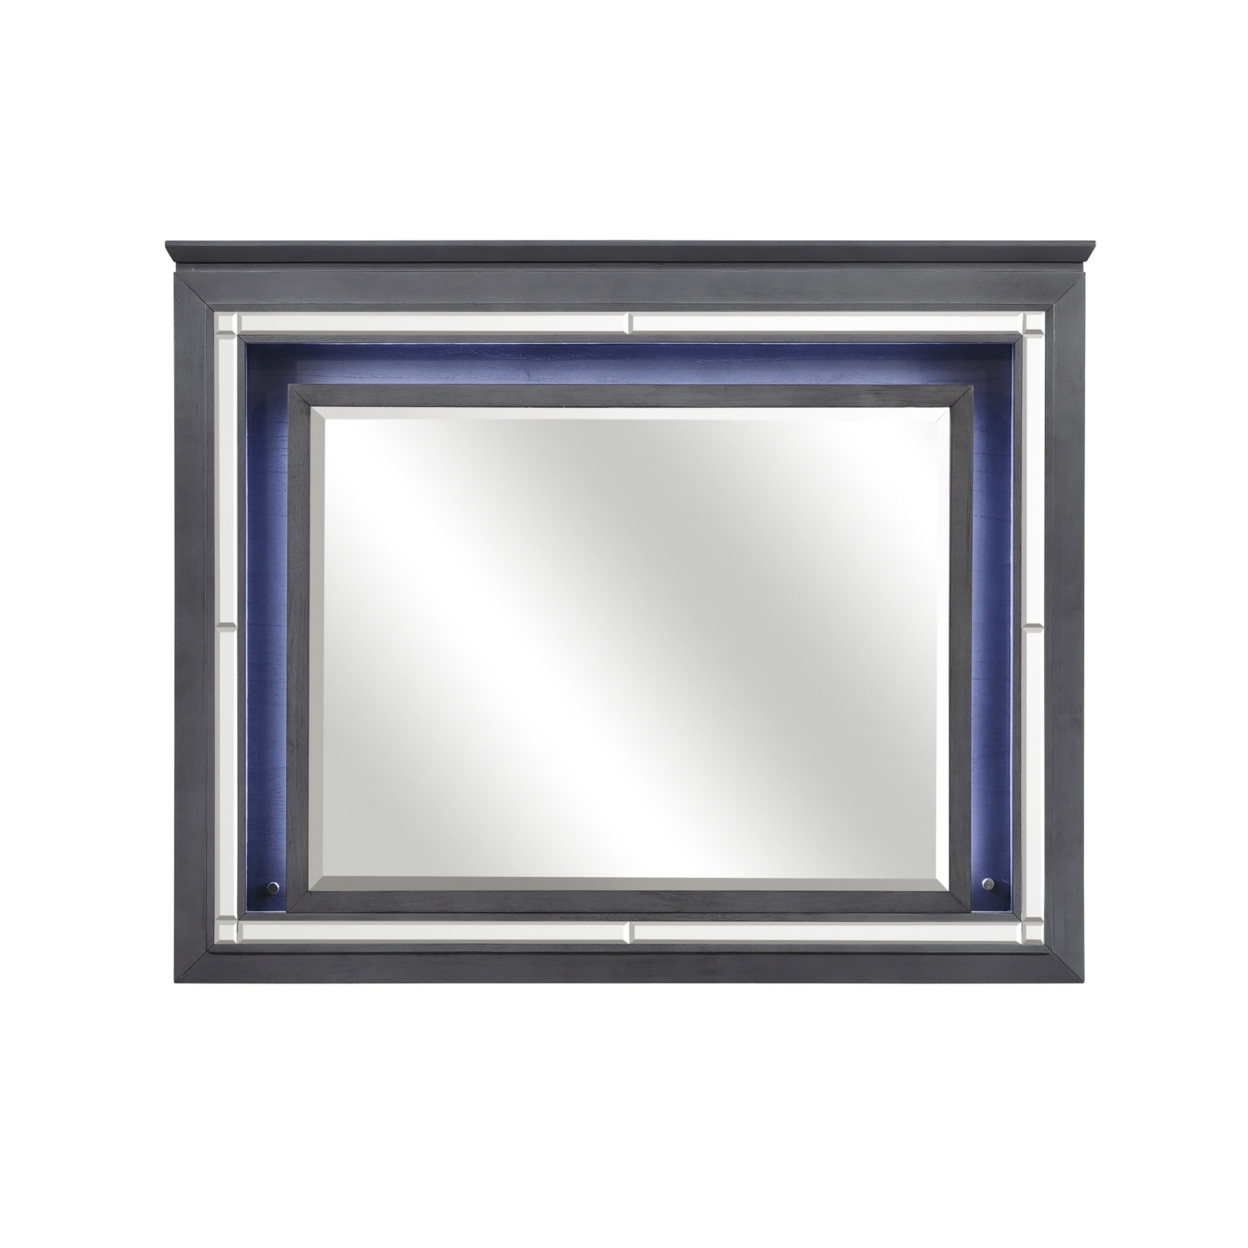 Contemporary Style Beveled Edge Mirror With LED Light, Gray And Silver- Saltoro Sherpi